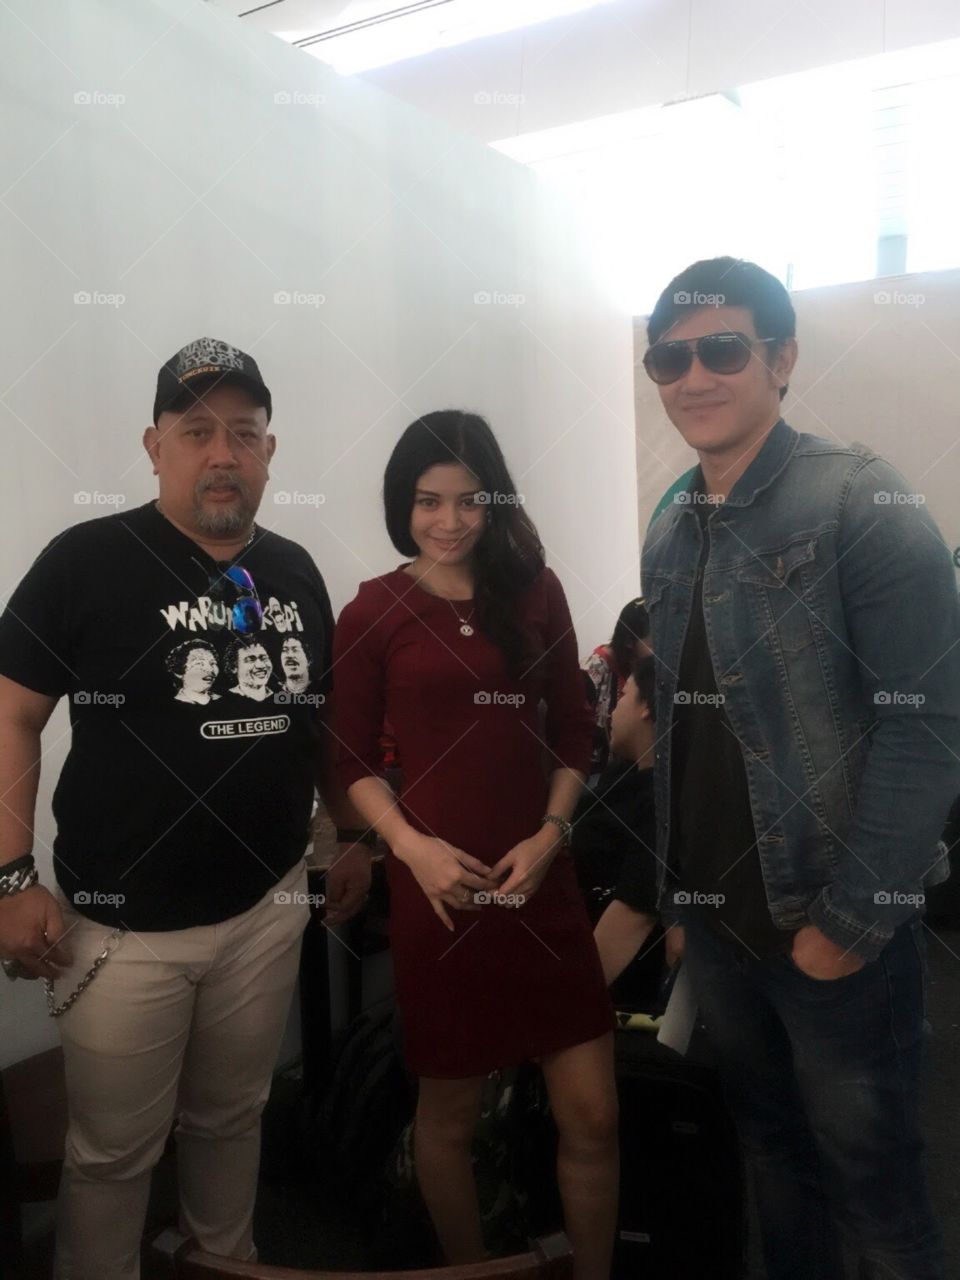 what is the happiness, yaah when we meet with Big Star movie star indonesia ... who is them, yeaahh Bang Indro and Vino G Bastian